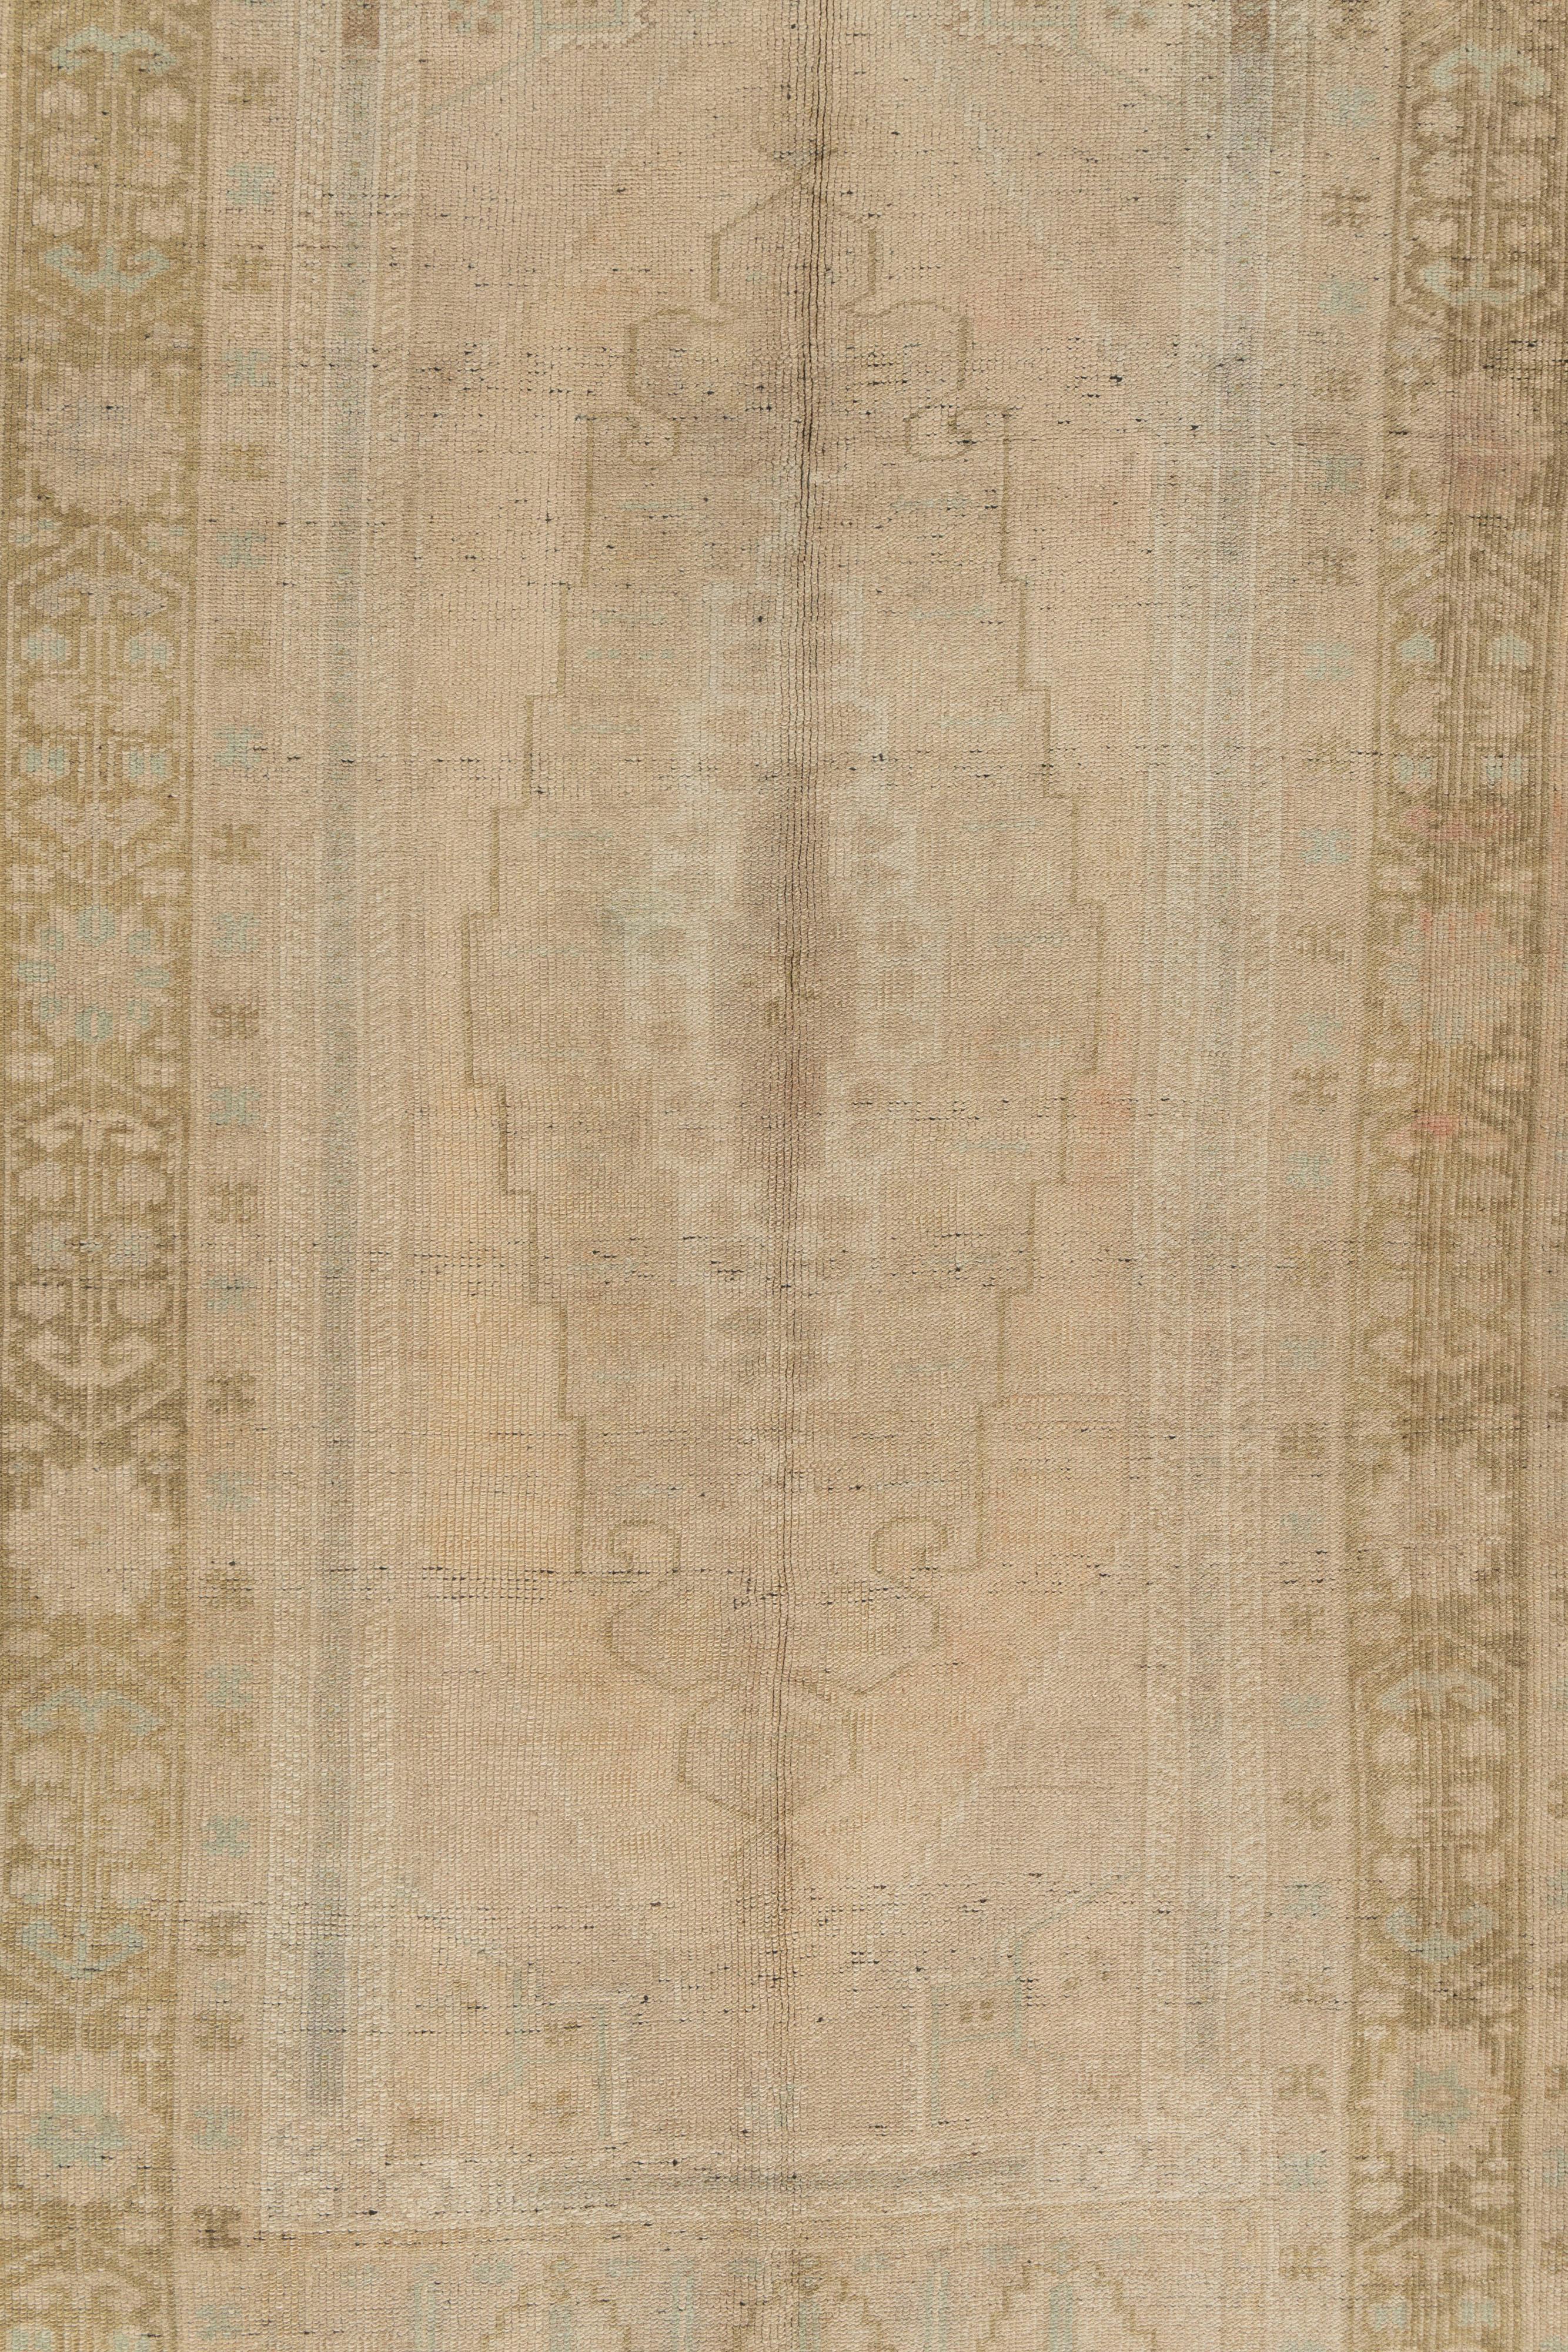 Antique Oushak Area Rug 3'7 X 7'3. Oushak's are known for their soft palettes combined with eccentric drawing. Oushak in western Turkey has the longest continuous rug weaving history, stretching back at least to the mid-fifteenth century. It has